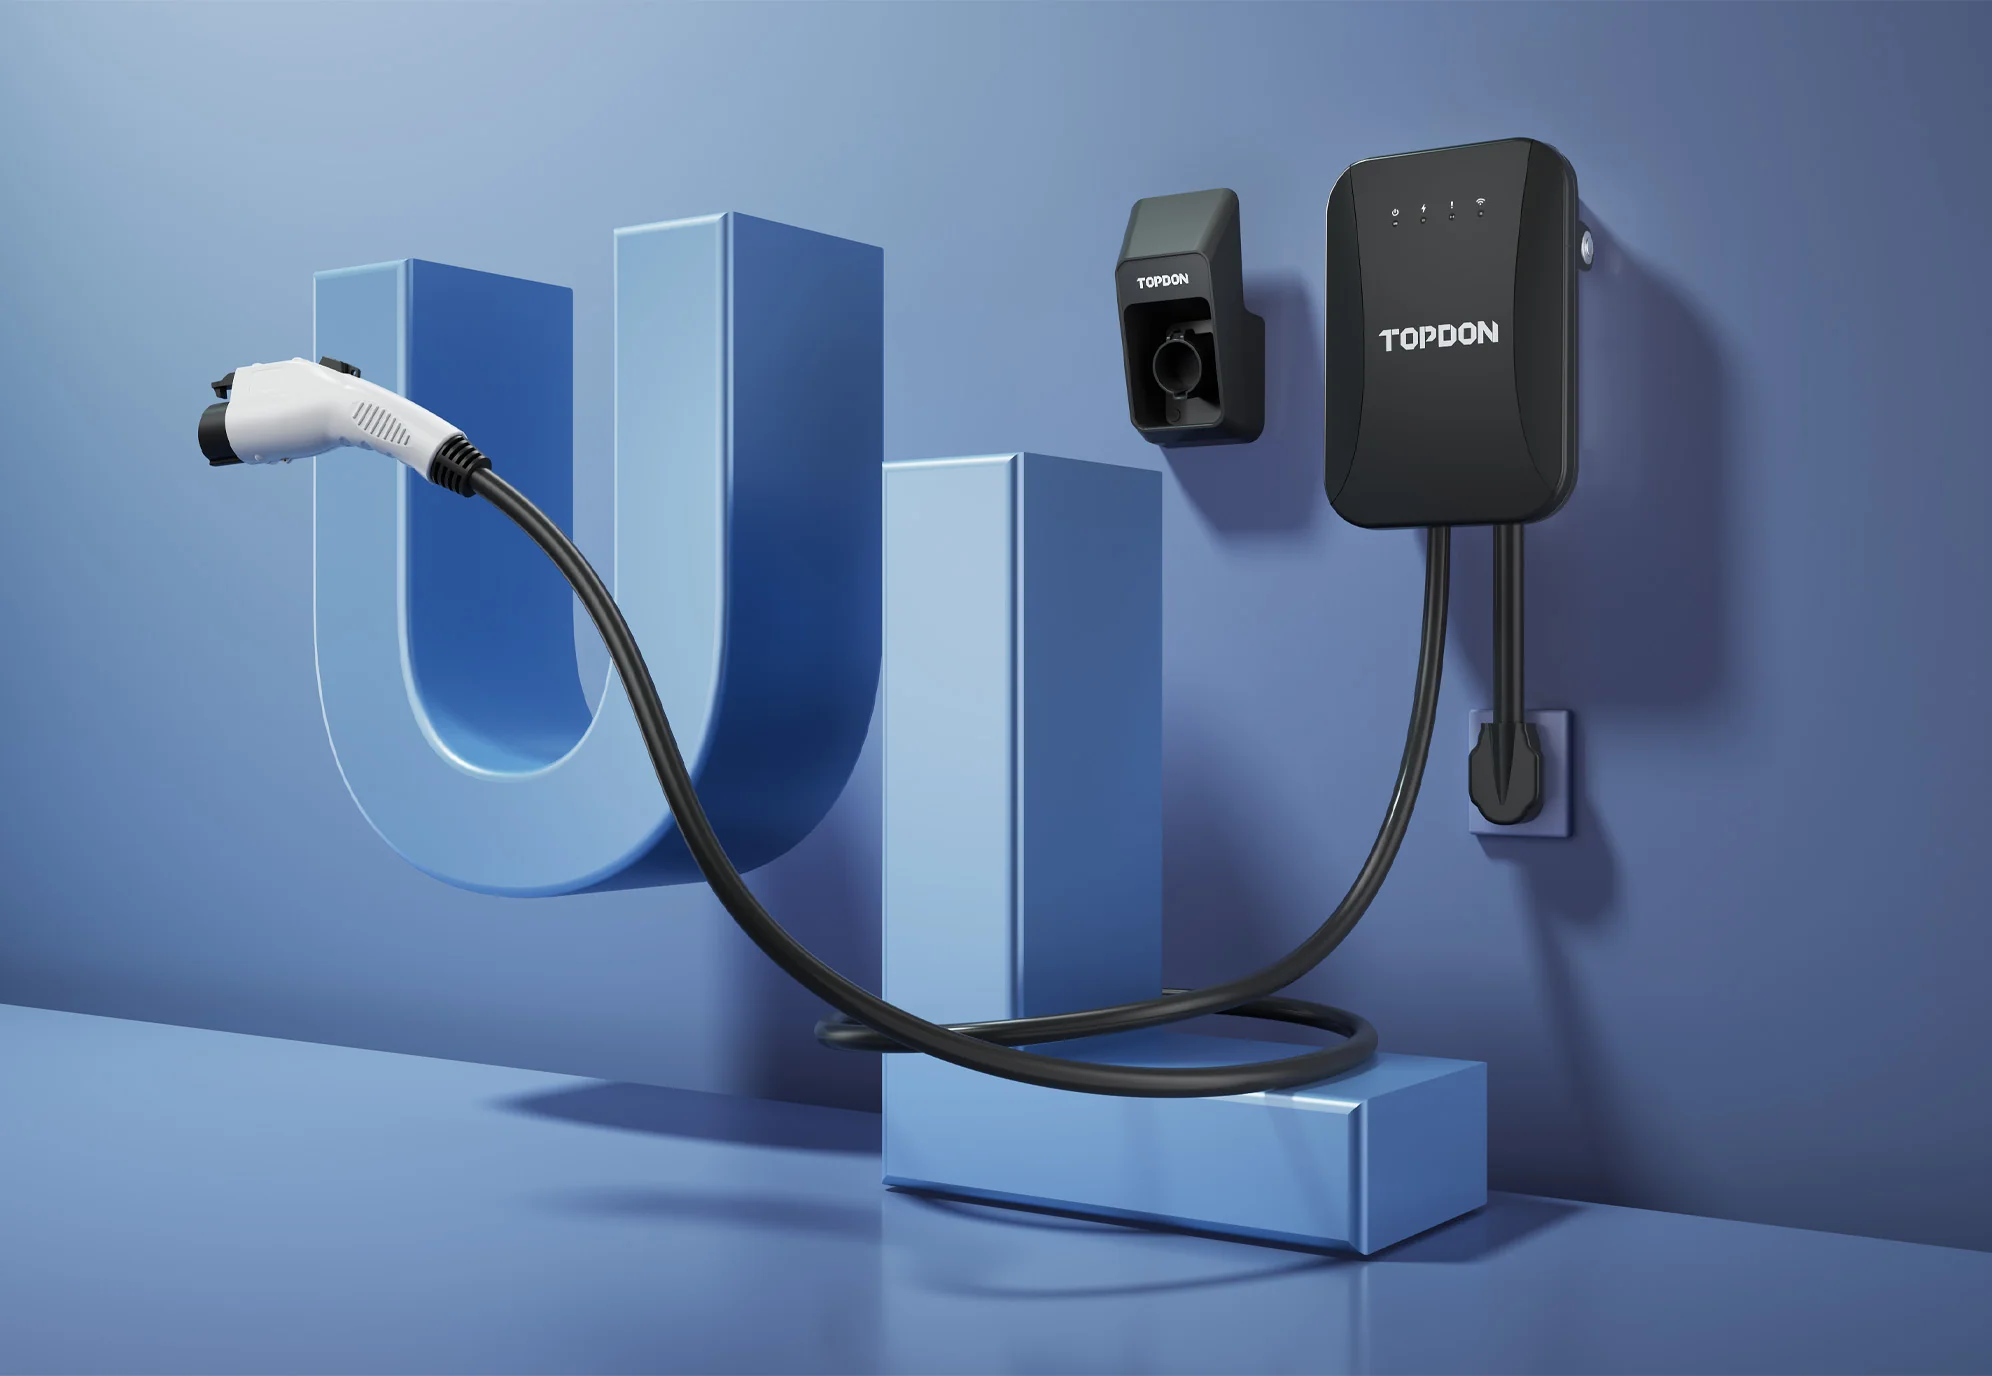 TOPDON PulseQ 7KW 1 Phase EV Charger (7.5M)